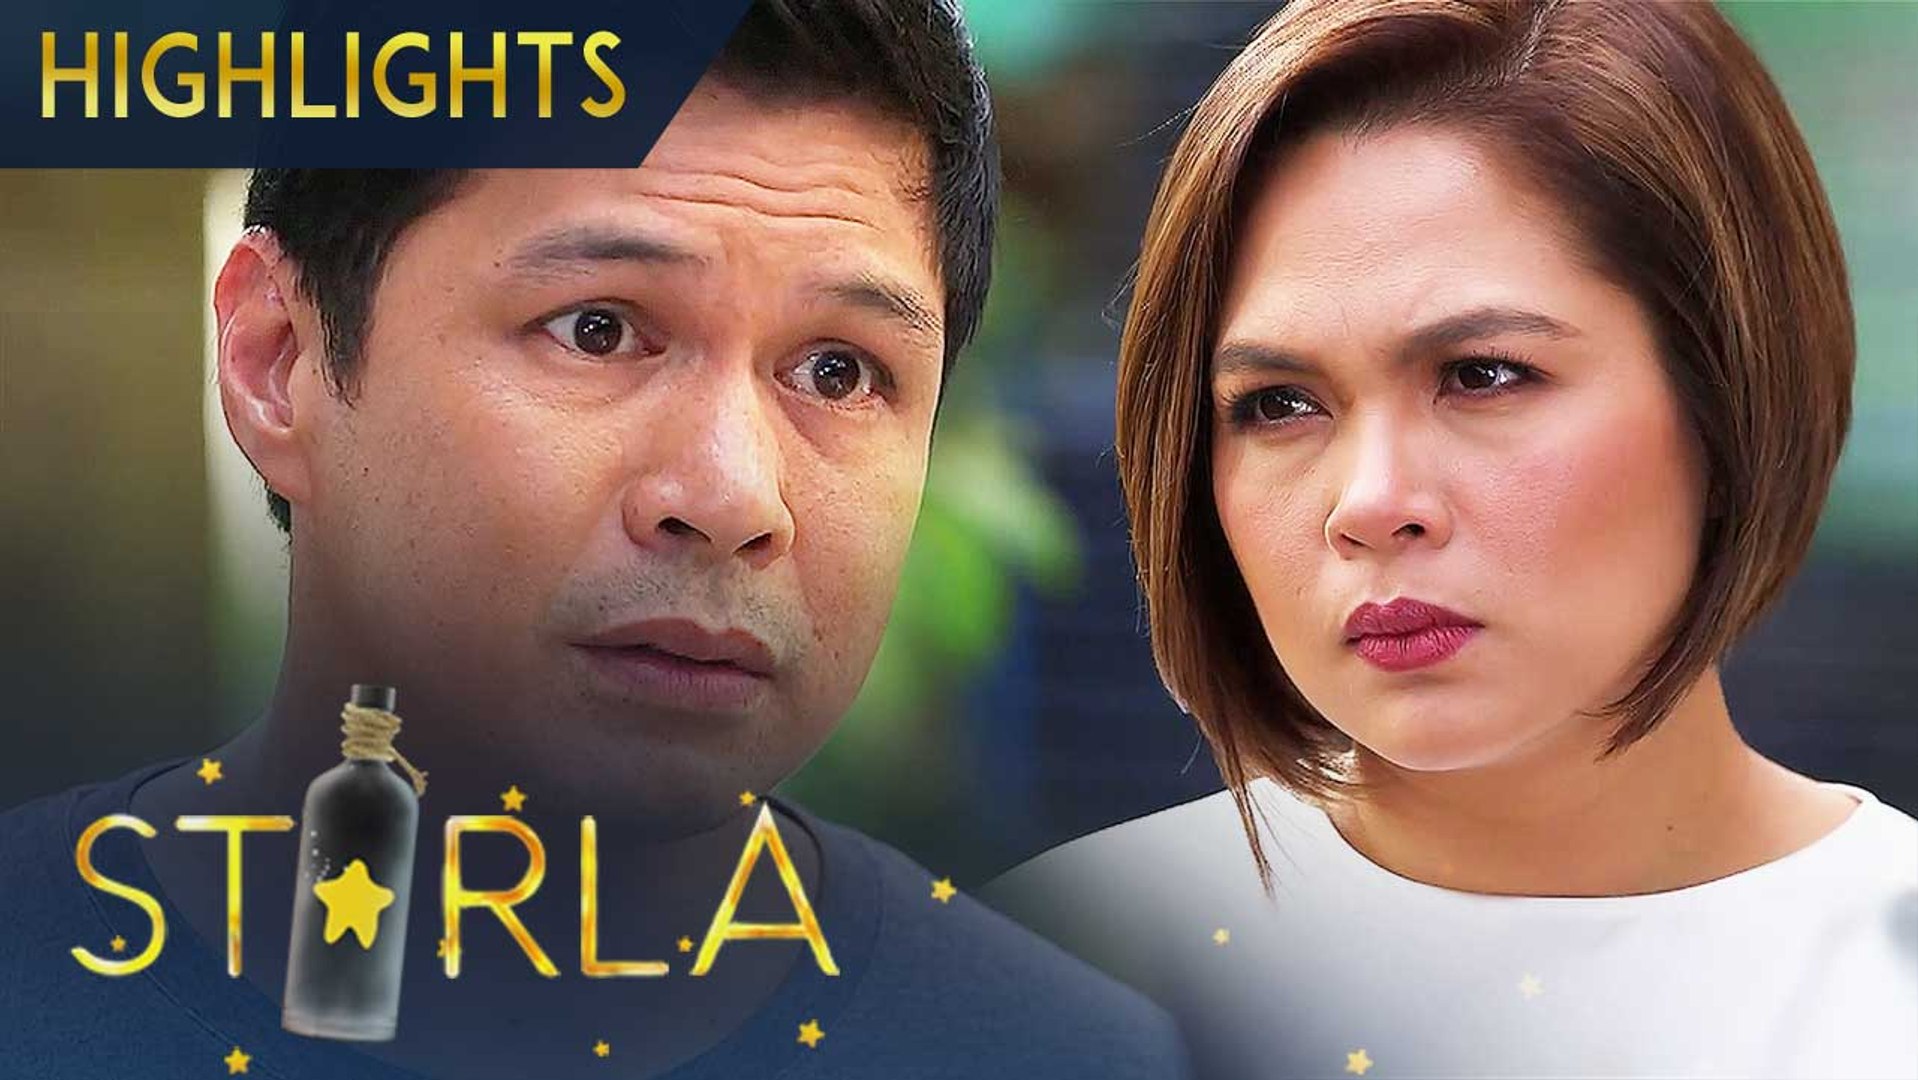 Doc Philip is getting tired of his feud with Teresa | Starla